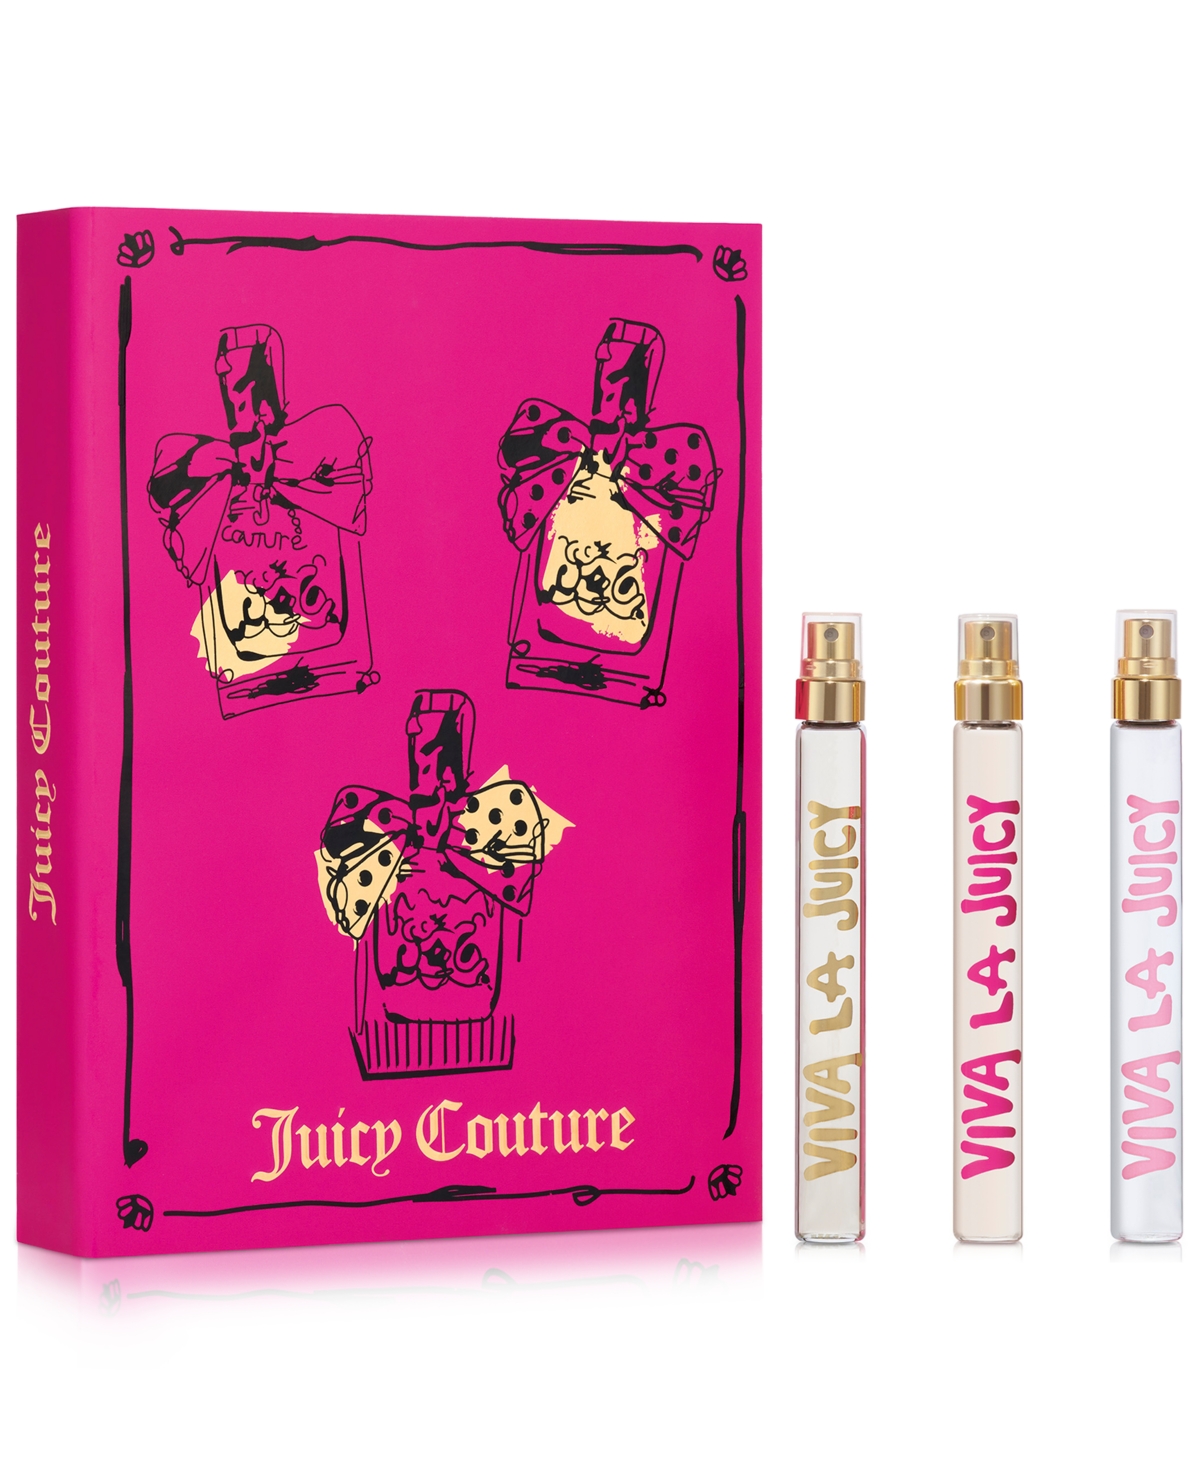 3-Pc. House of Juicy Couture Travel Spray Gift Set